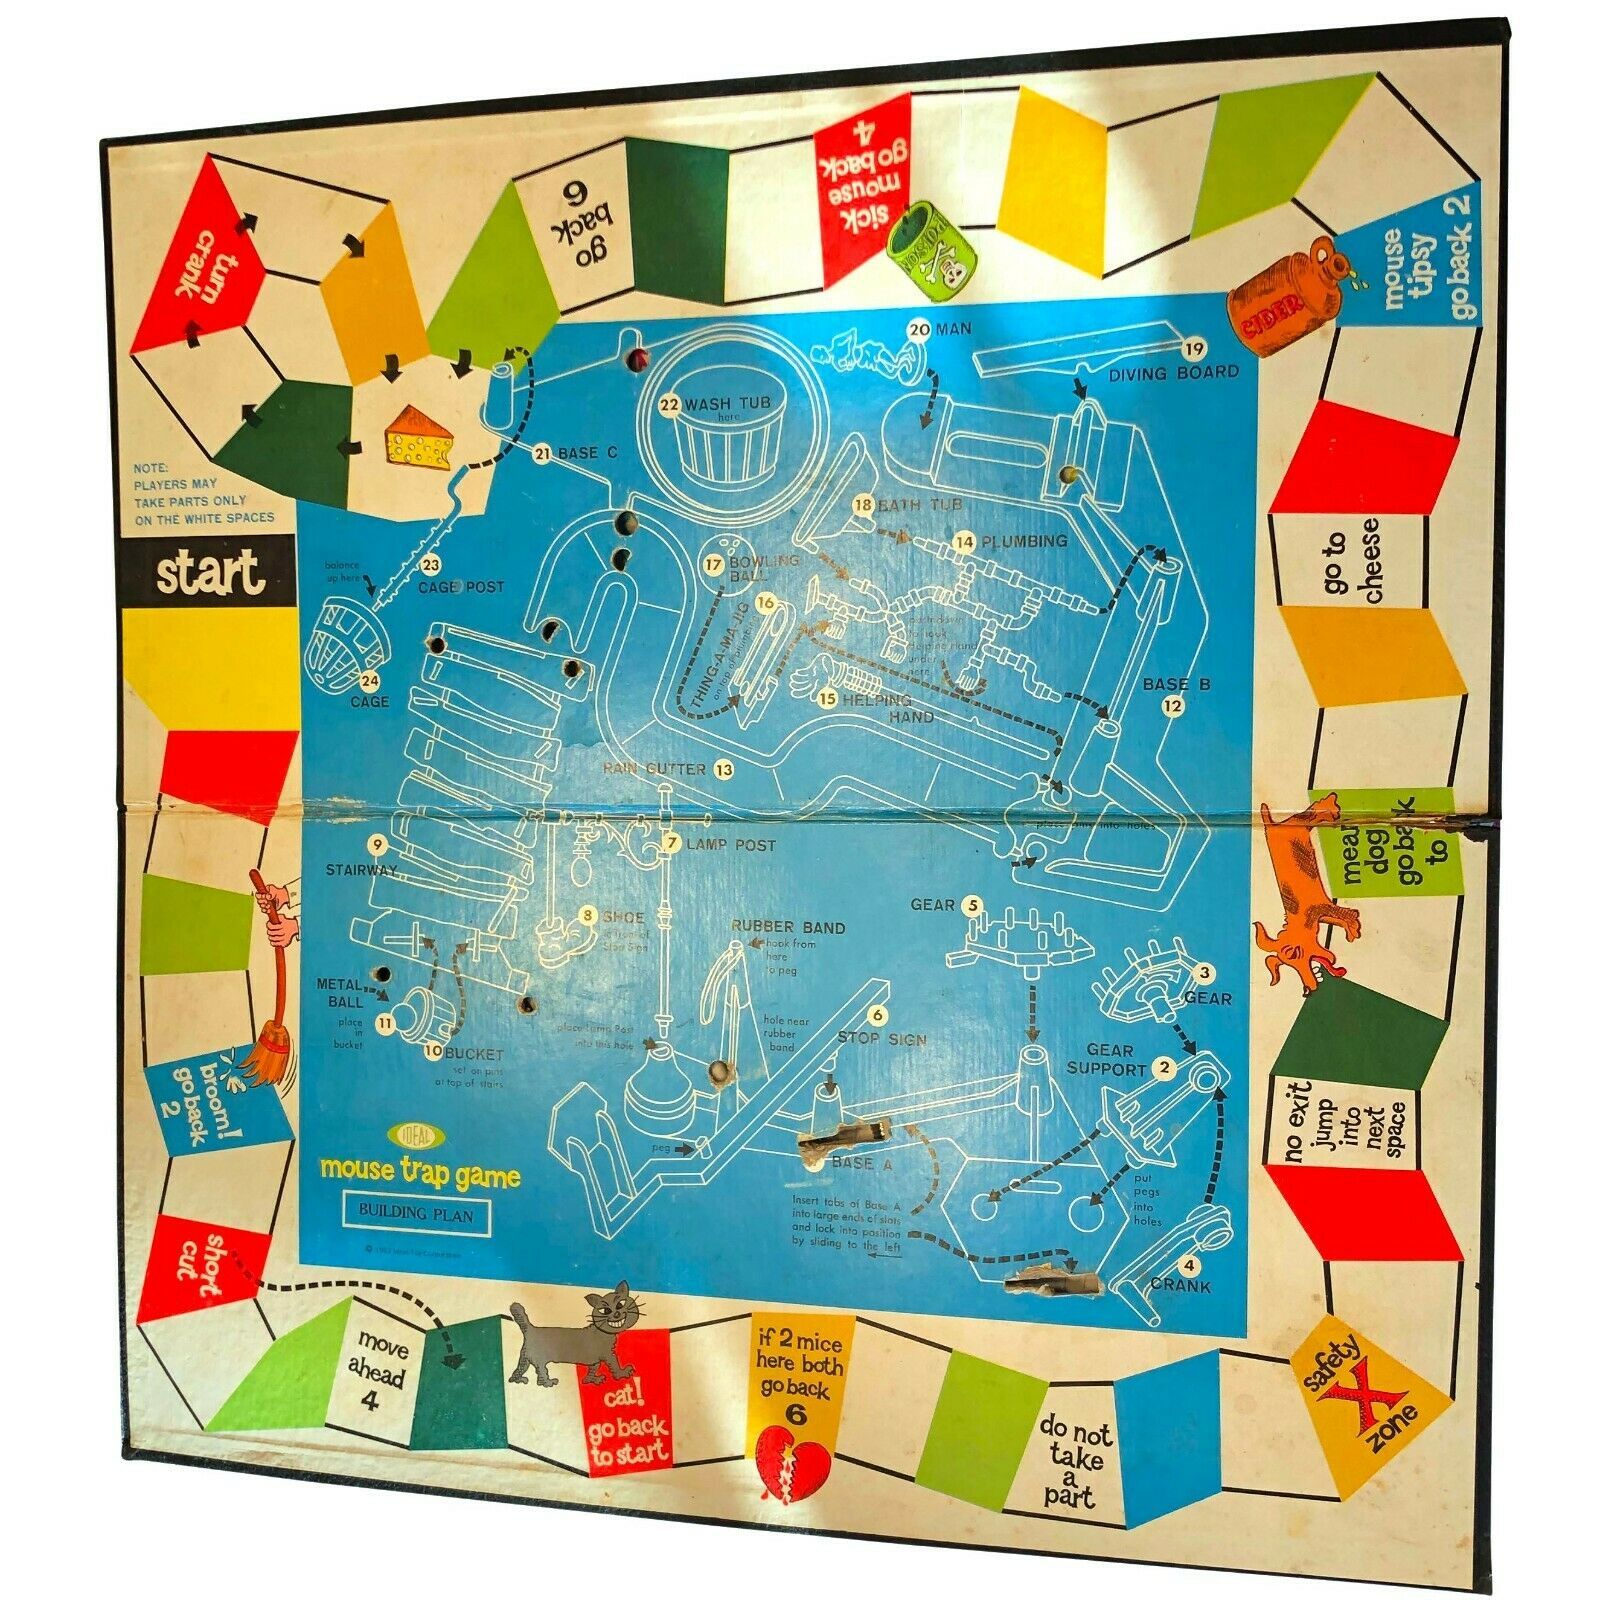 1963 Mouse Trap Board Game, AUTHENTIC ORIGINAL VINTAGE playing board (mousetrap) - $19.99